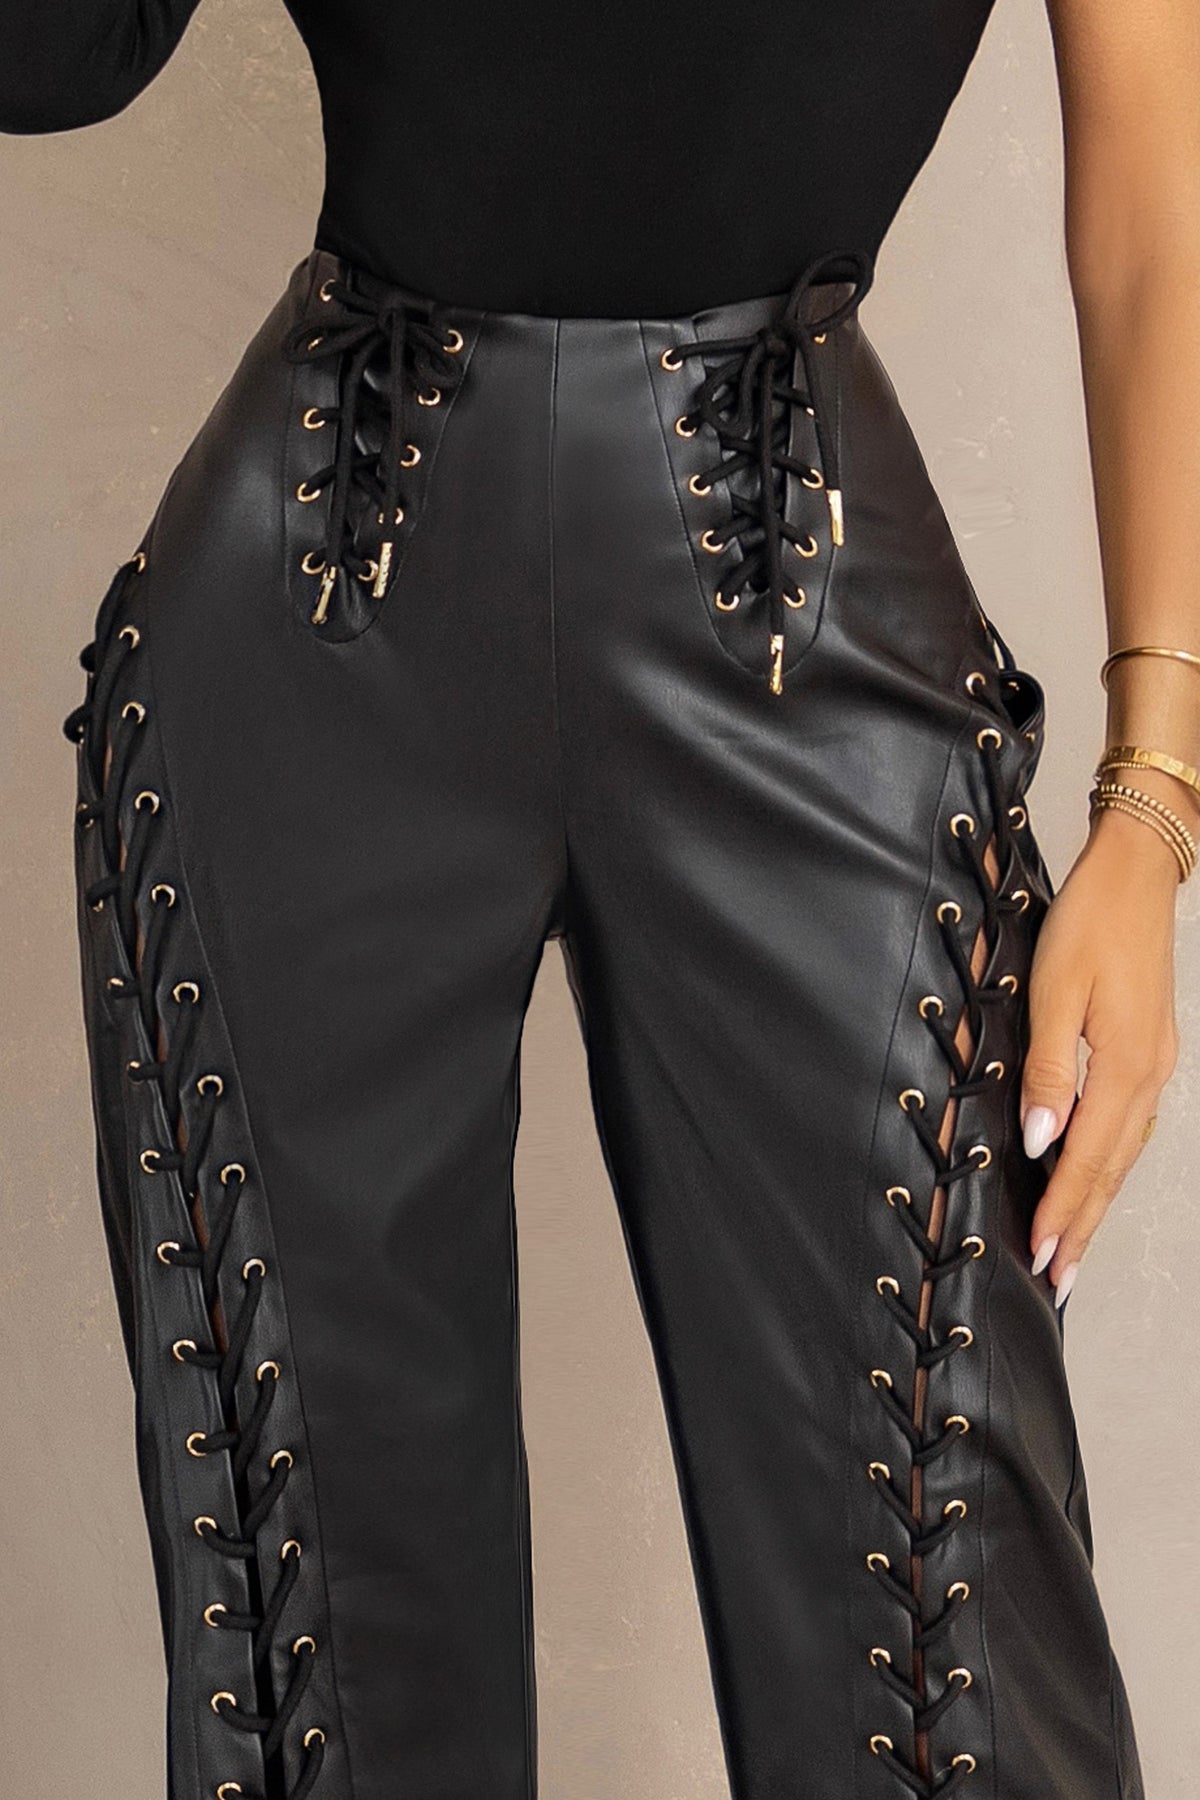 Lace Up Leather Pant For Men | Native High Quality Pants